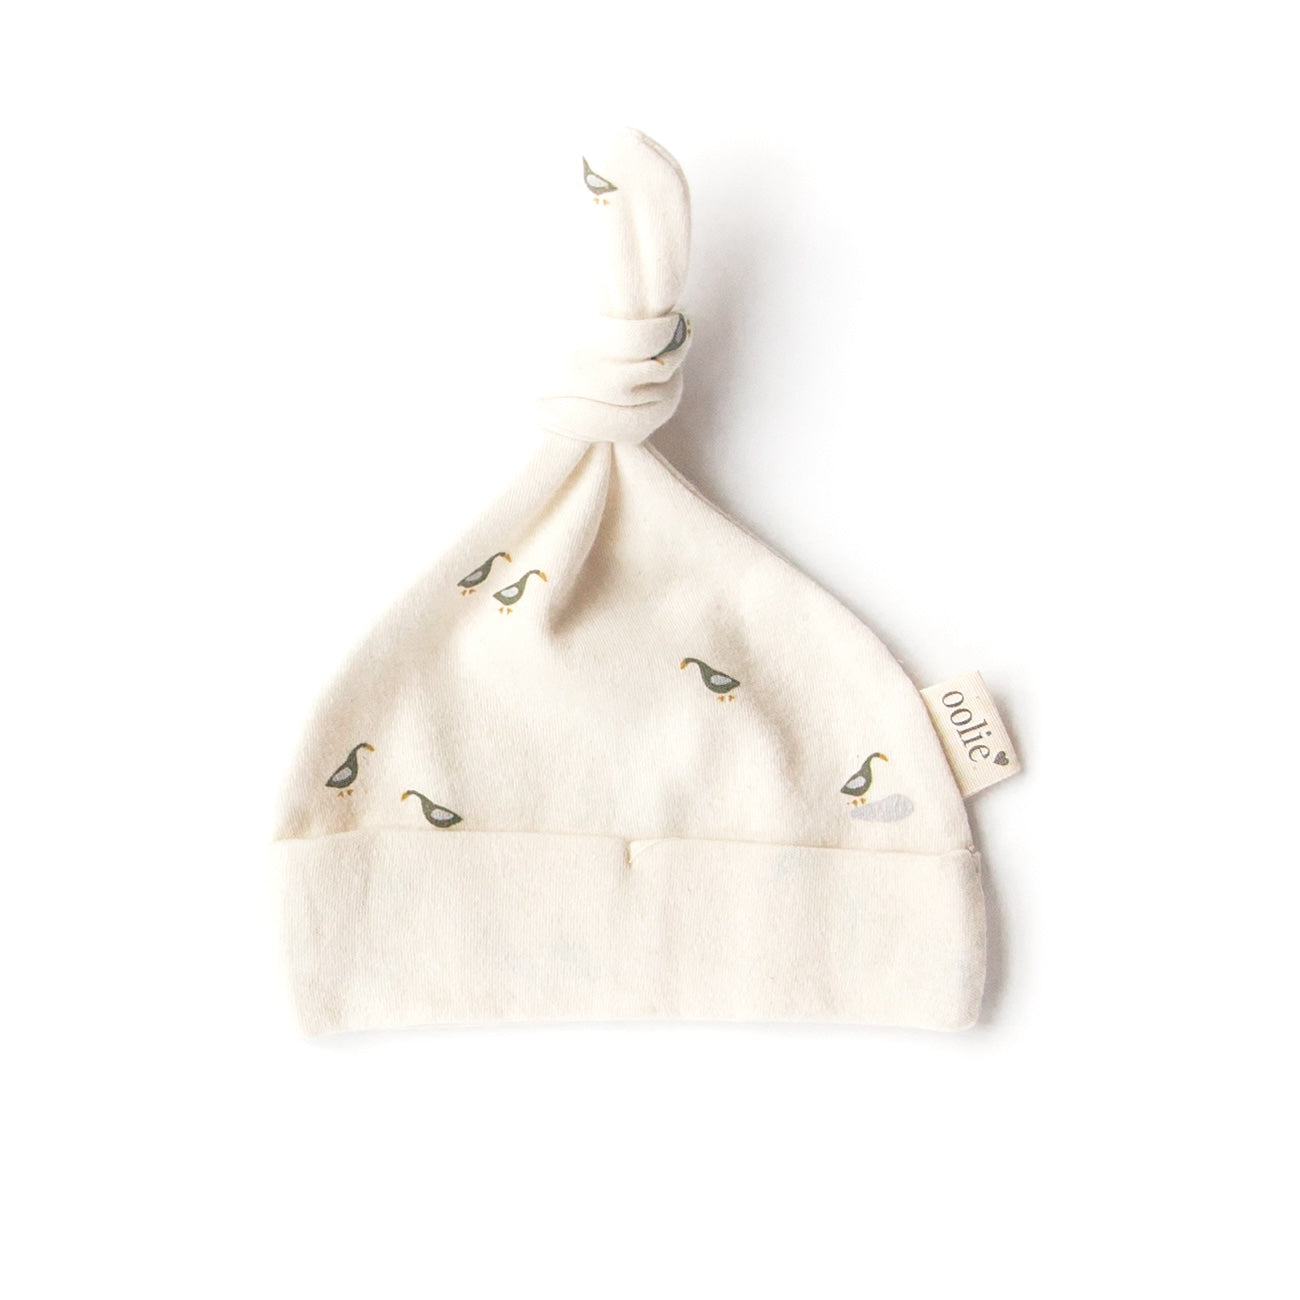 An Oolie organic cotton top knot baby hat with the runner ducks print, a natural color with small green and blue ducks in a repeating pattern.